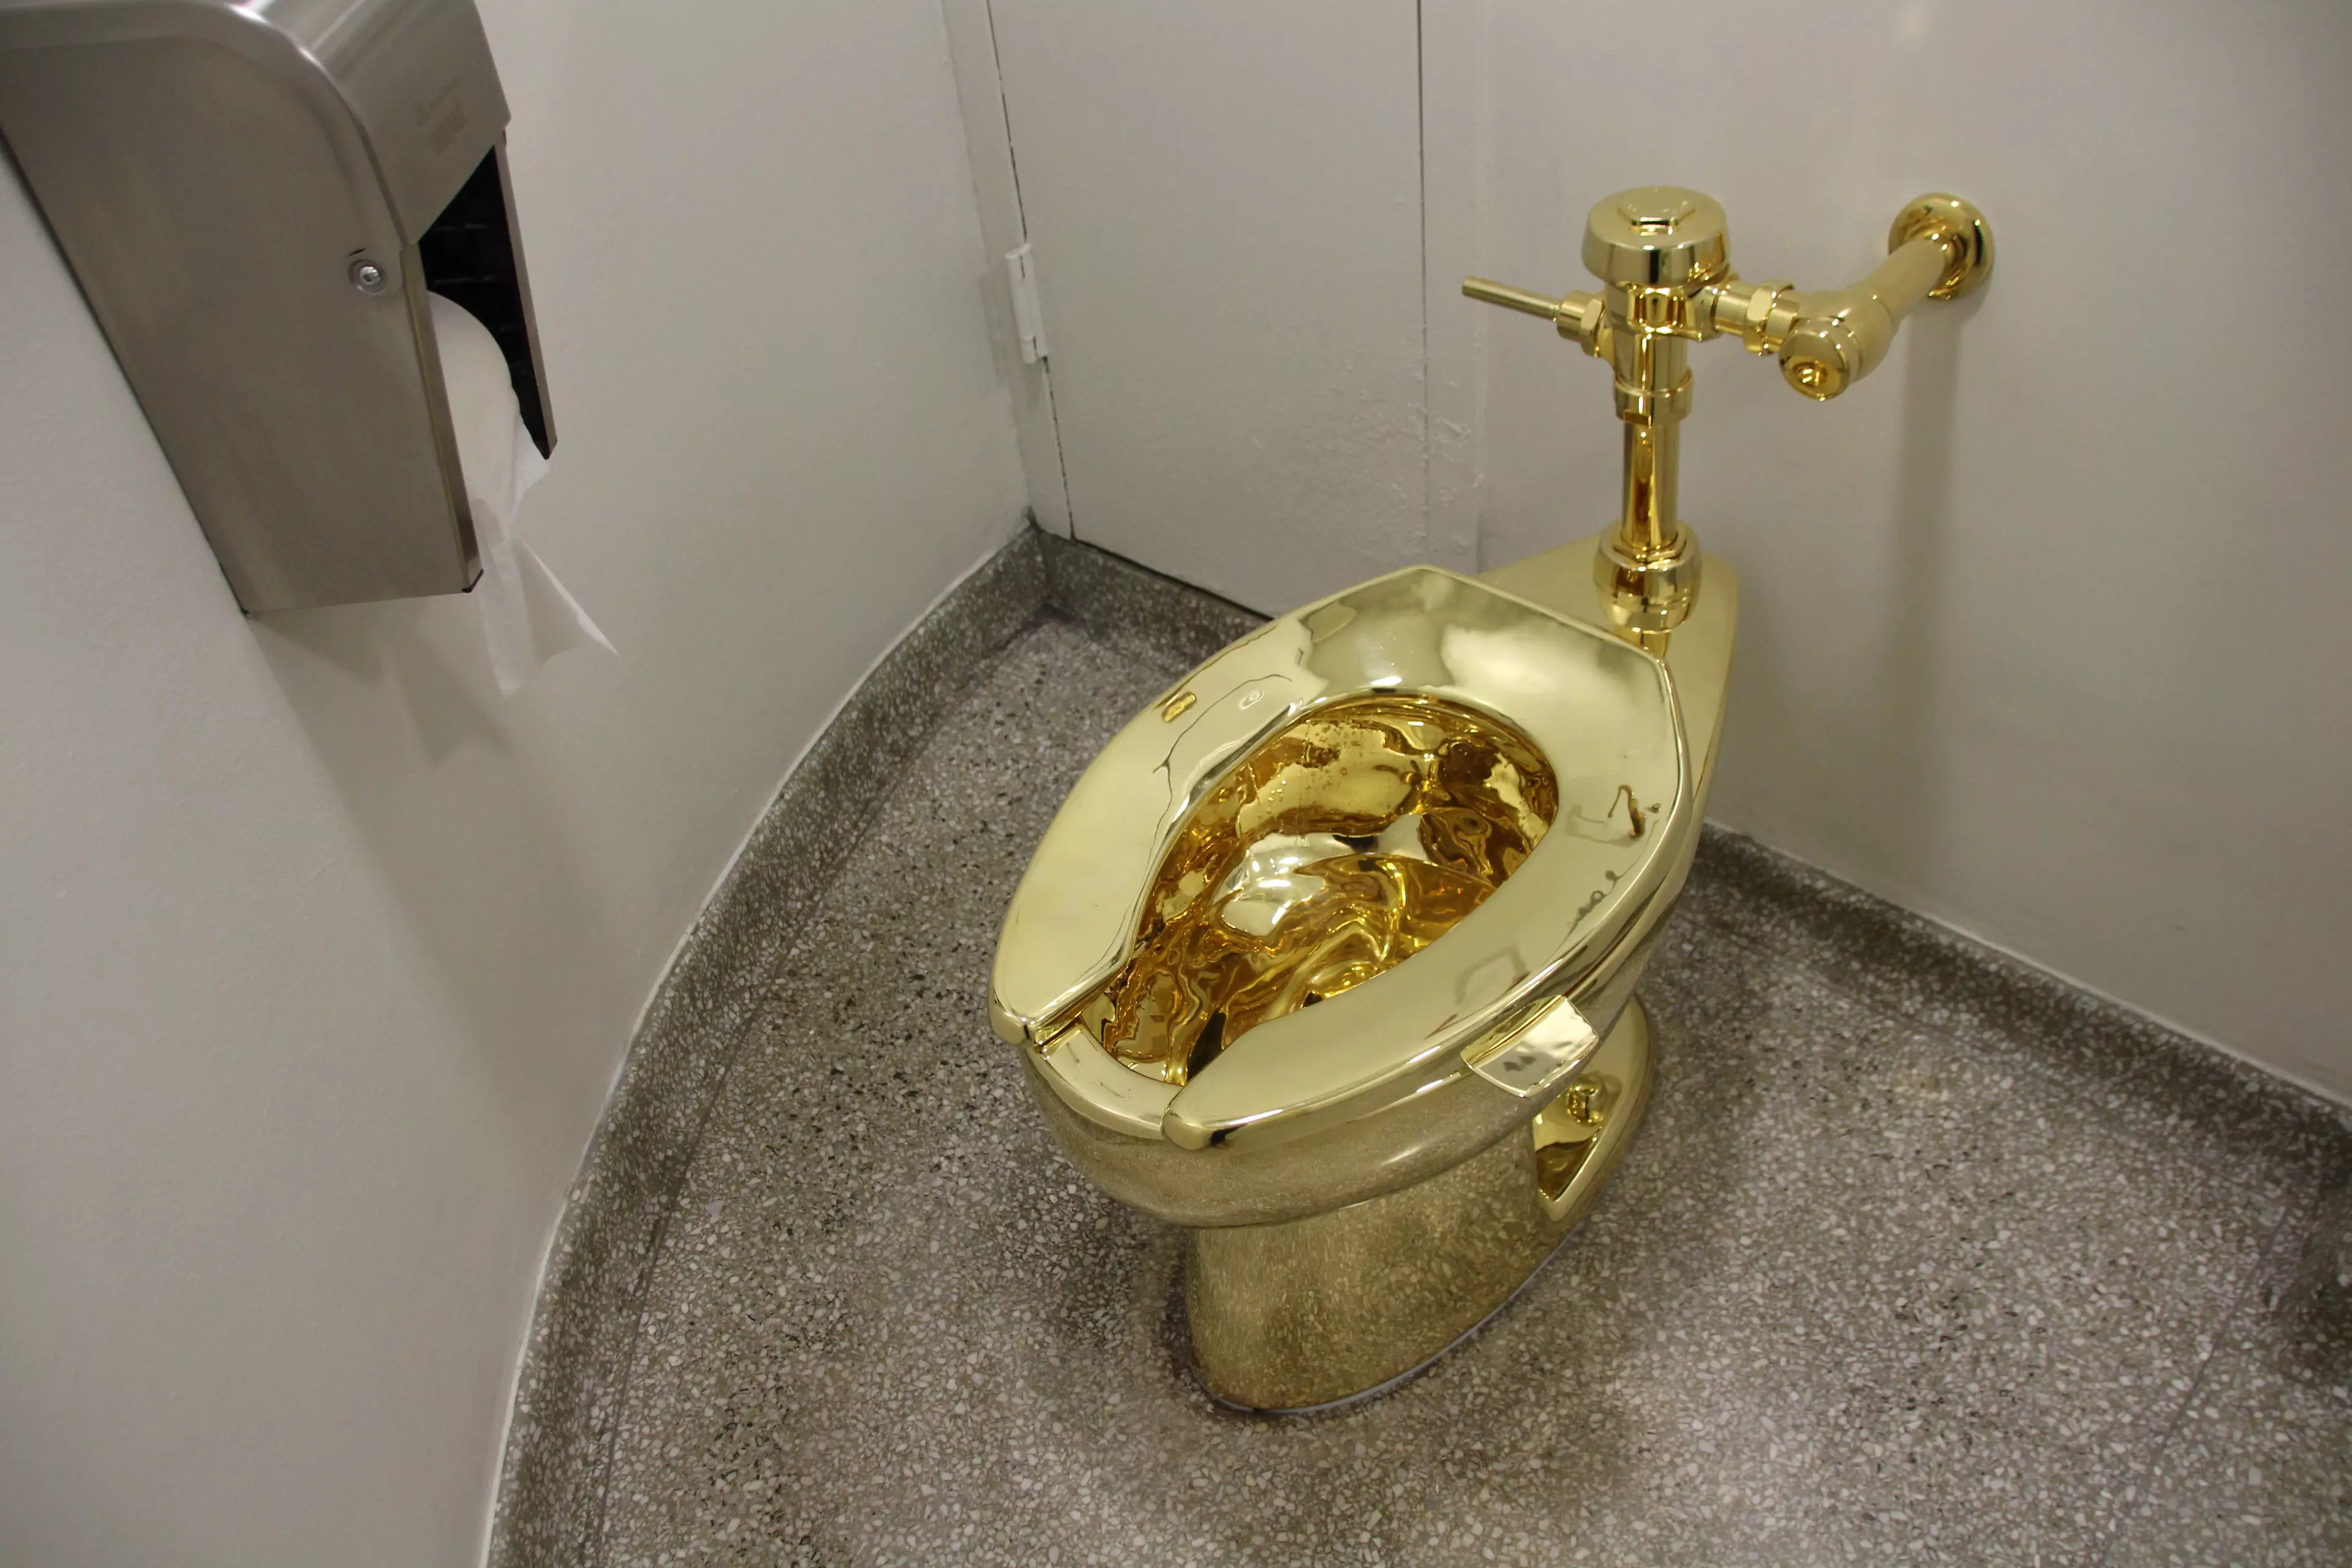 The toilet had only been on display for a few days before it was stolen.